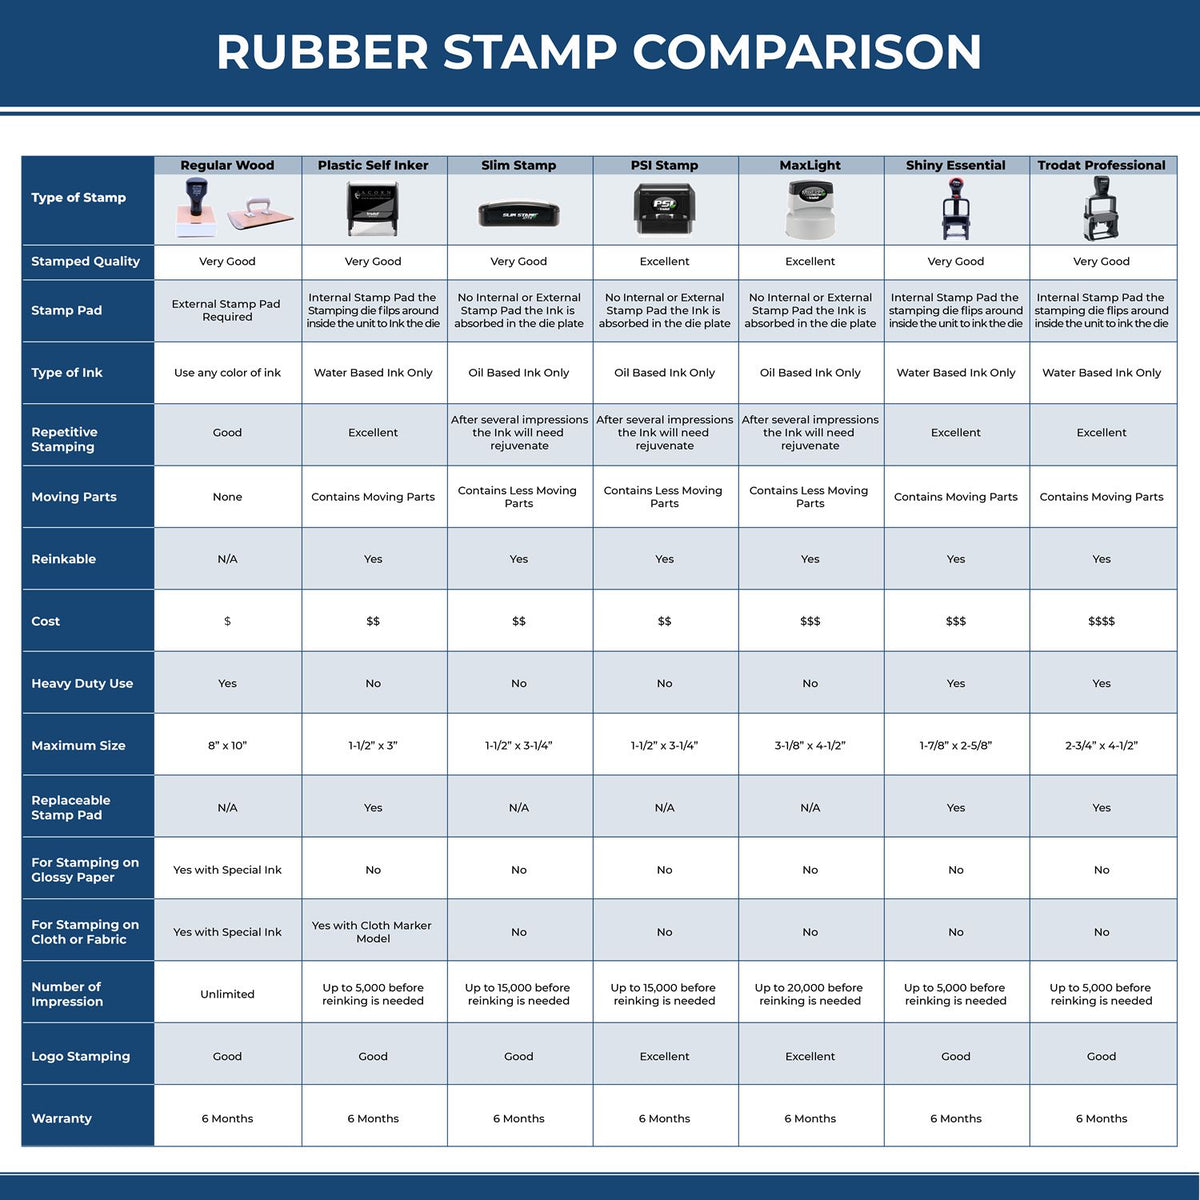 A comparison chart for the different types of mount models available for the MaxLight Premium Pre-Inked Vermont State Seal Notarial Stamp.